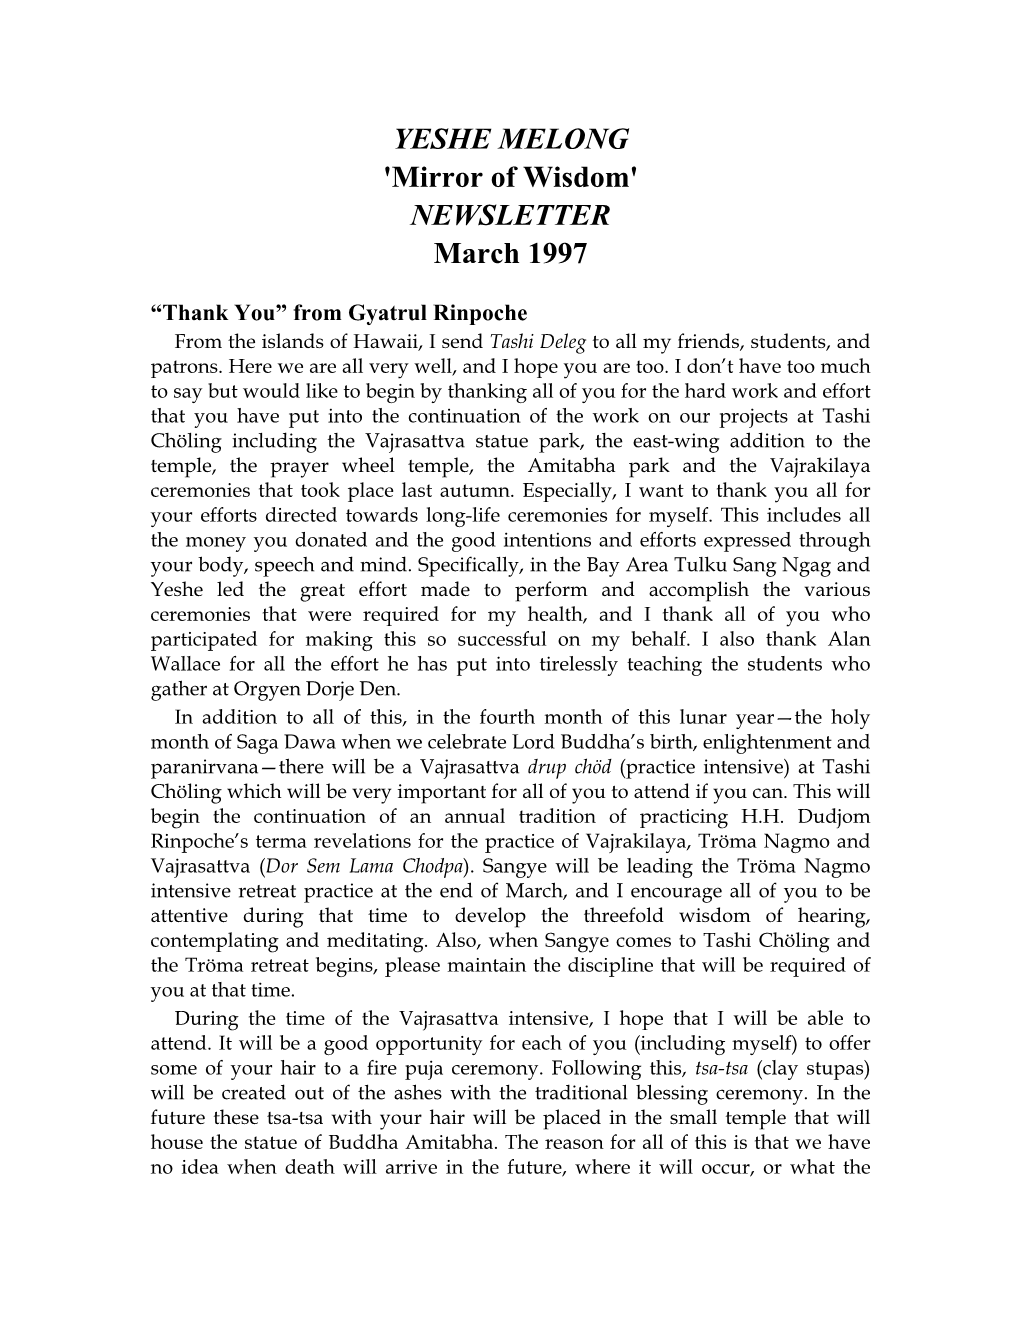 YESHE MELONG 'Mirror of Wisdom' NEWSLETTER March 1997